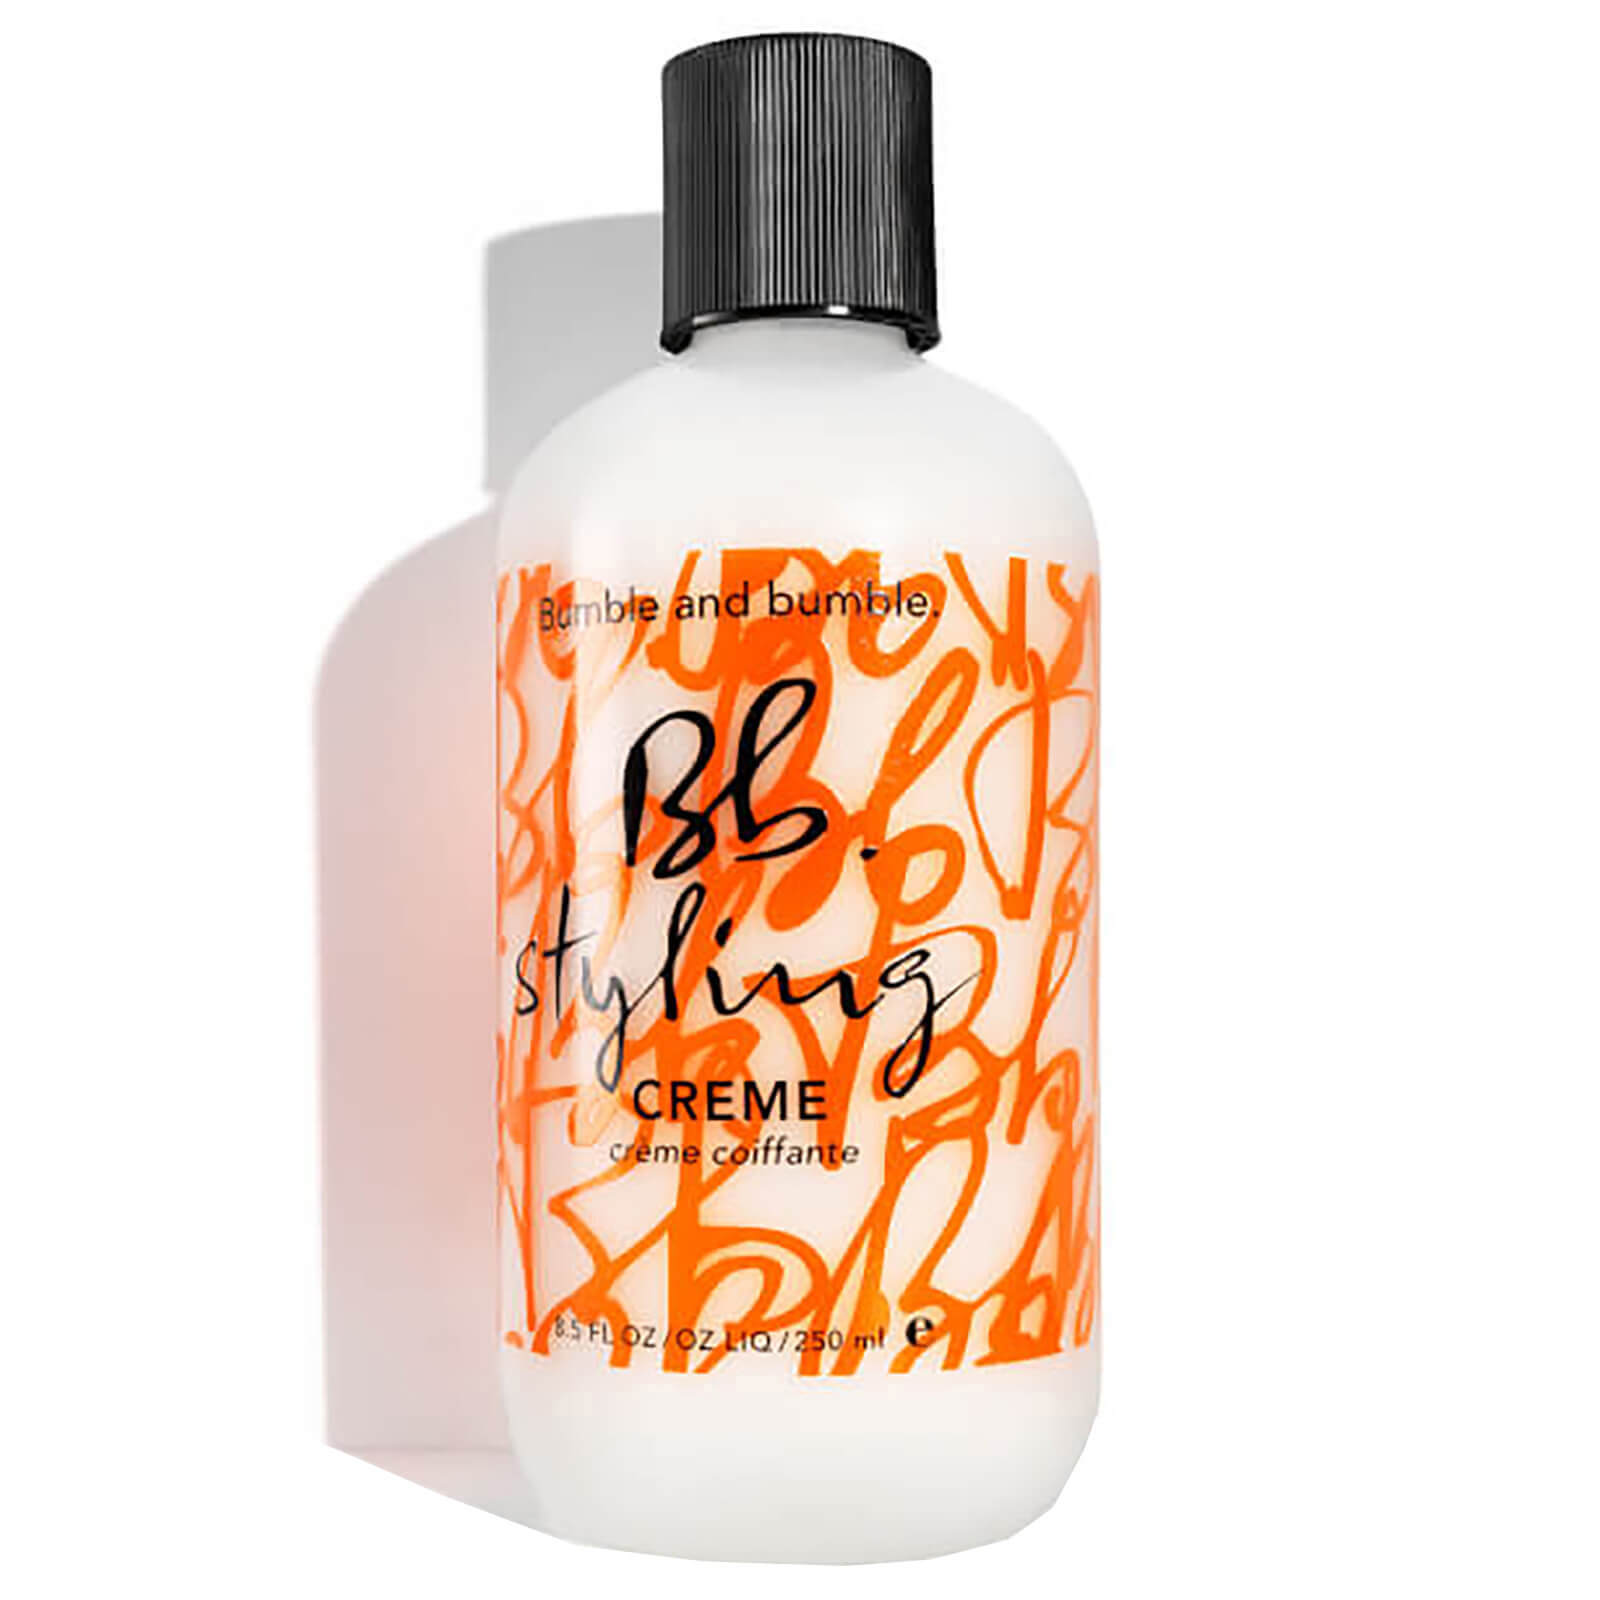 Image of Bumble and bumble Crema Styling 250ml